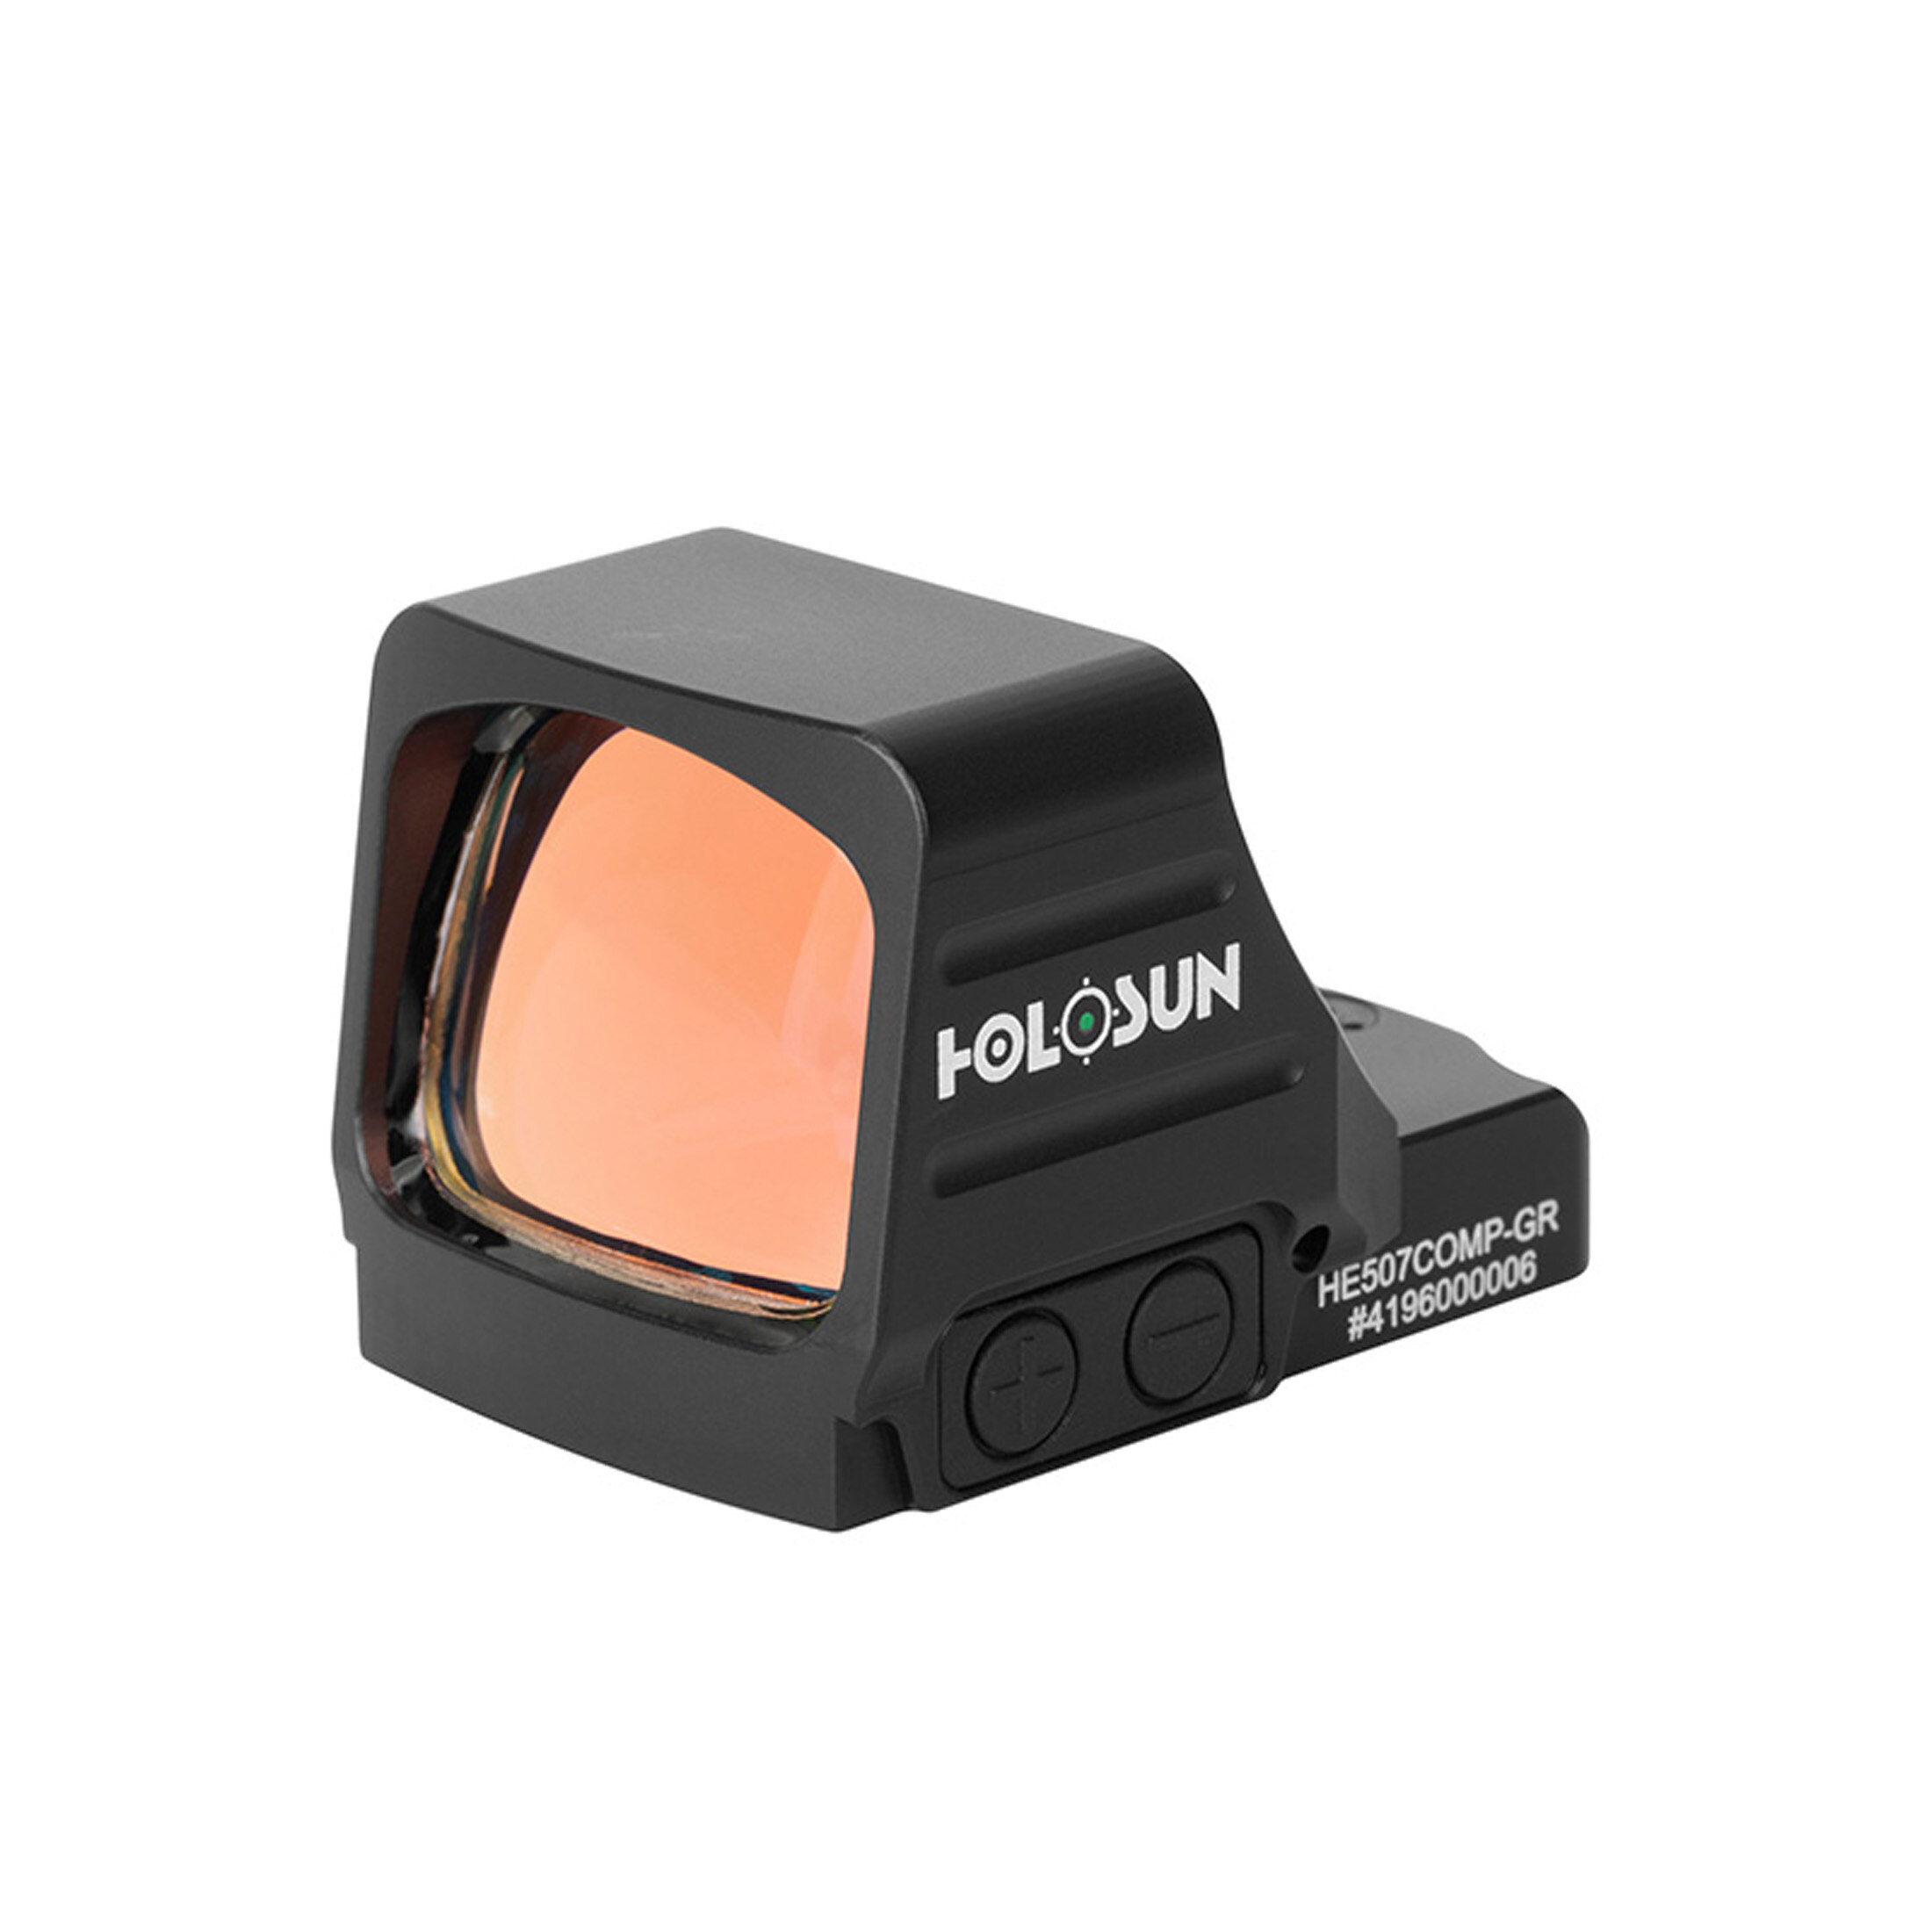 Holosun Open Reflex Red Dot Sight HE507COMP-GR with switchable reticle, green dot sight, Elite serie